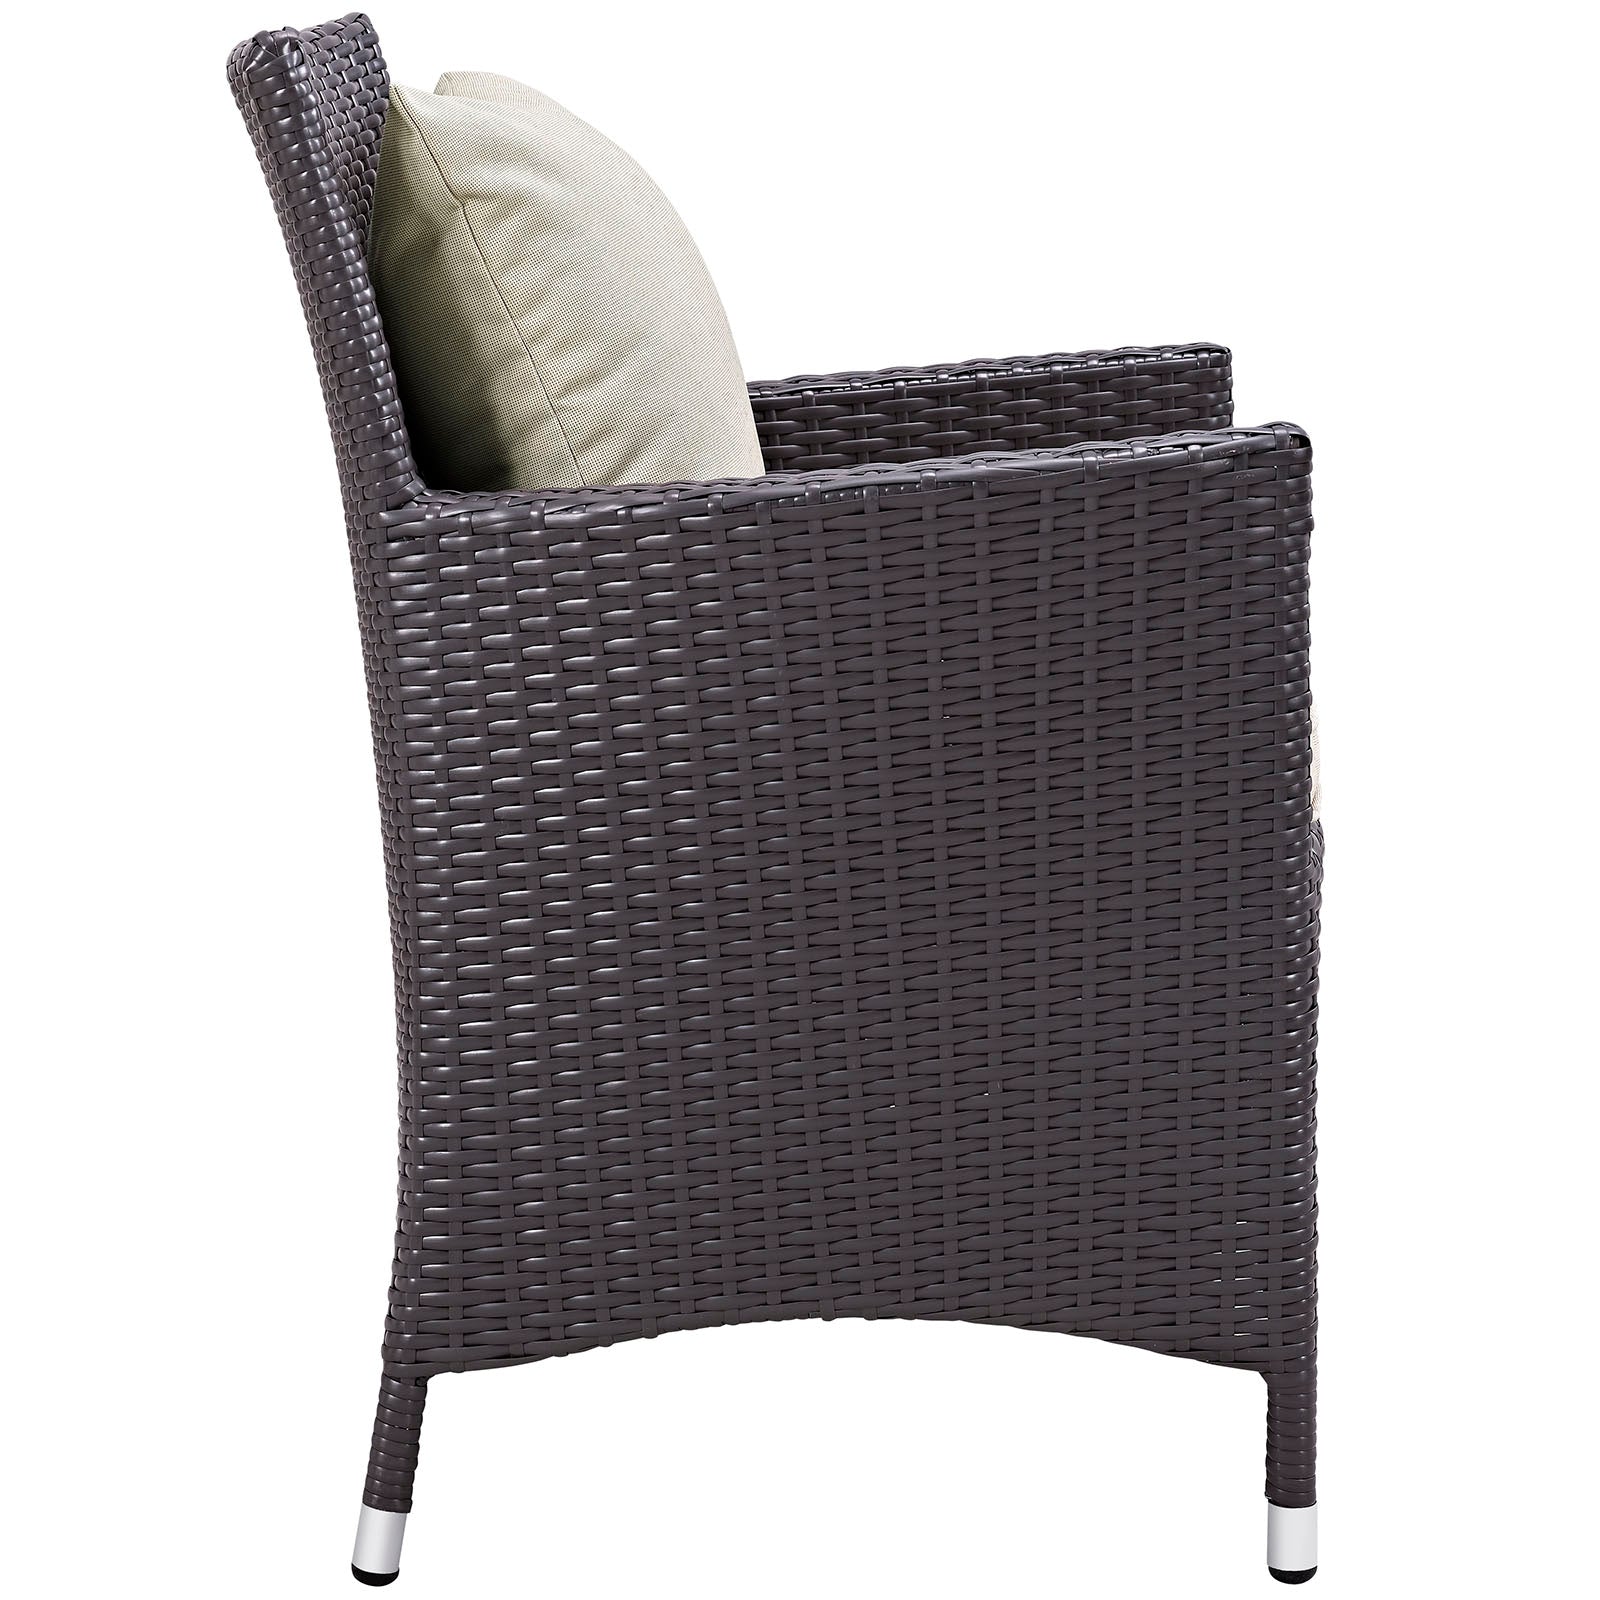 Modway Outdoor Dining Chairs - Convene Outdoor Dining Armchair Espresso & Beige